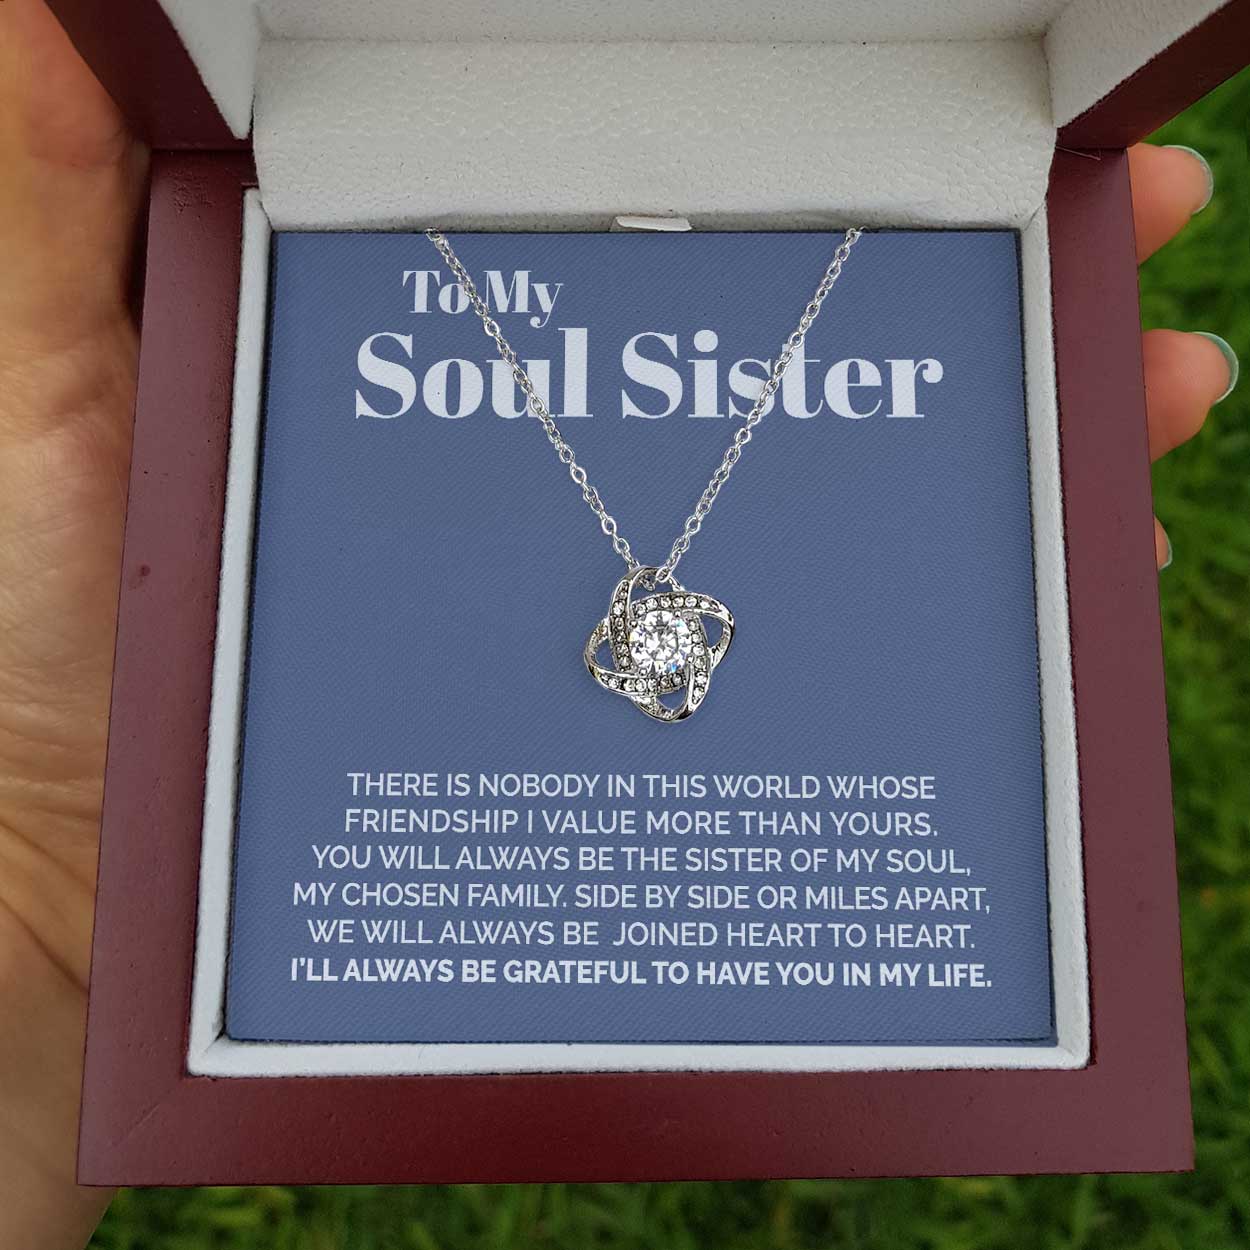 ShineOn Fulfillment Jewelry Standard Box To My Soul Sister - You Will Always Be The Sister of My Soul - Love Knot Necklace